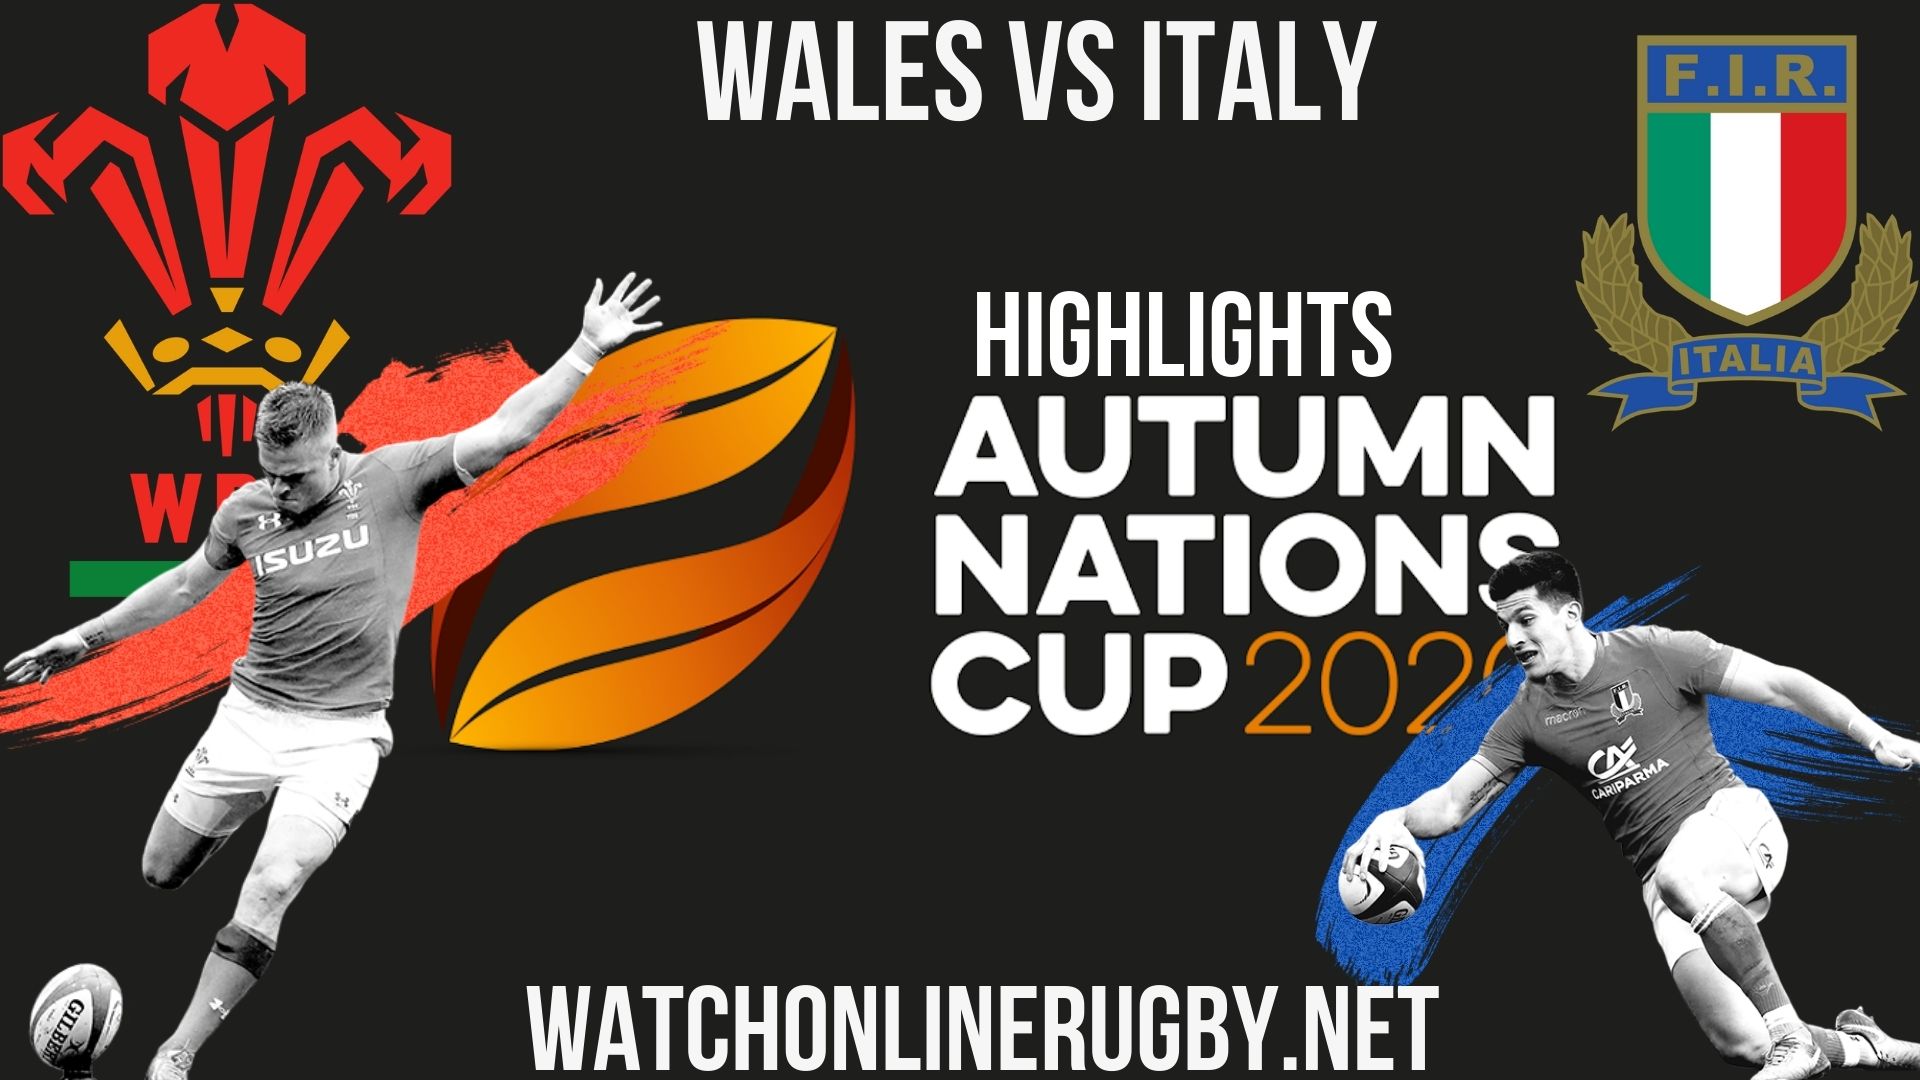 Wales Vs Italy Autumn Nations Cup 2020